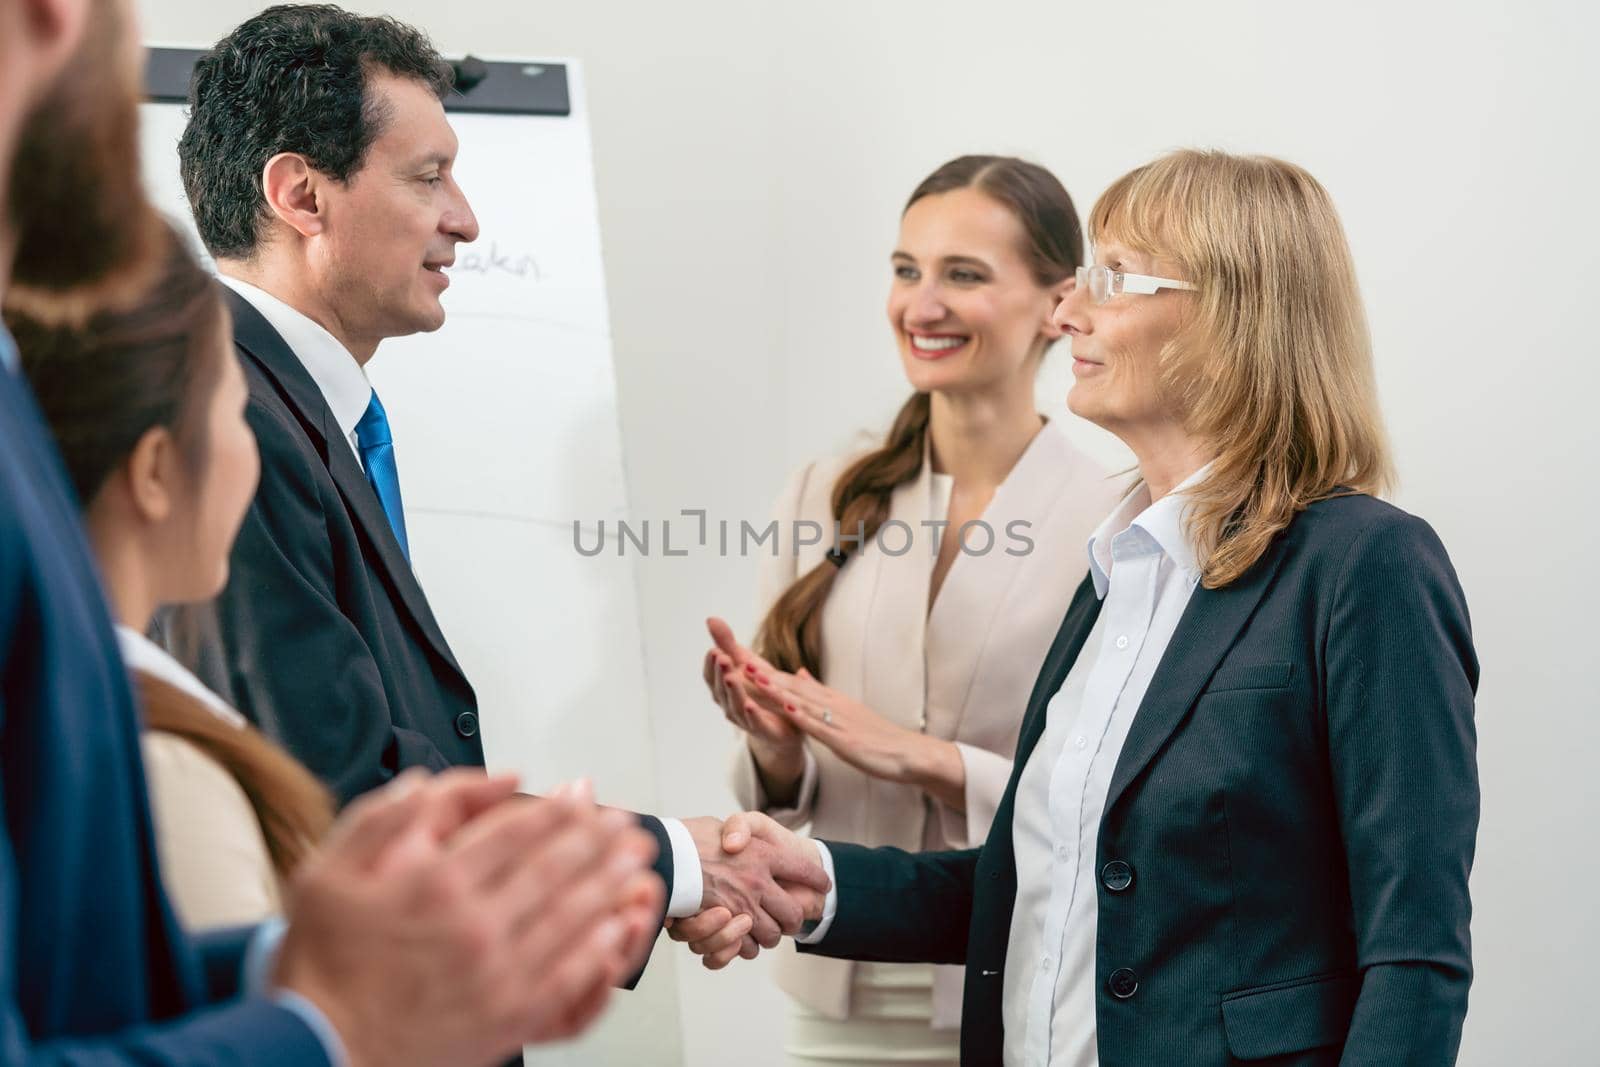 Two middle-aged business associates smiling while shaking hands by Kzenon